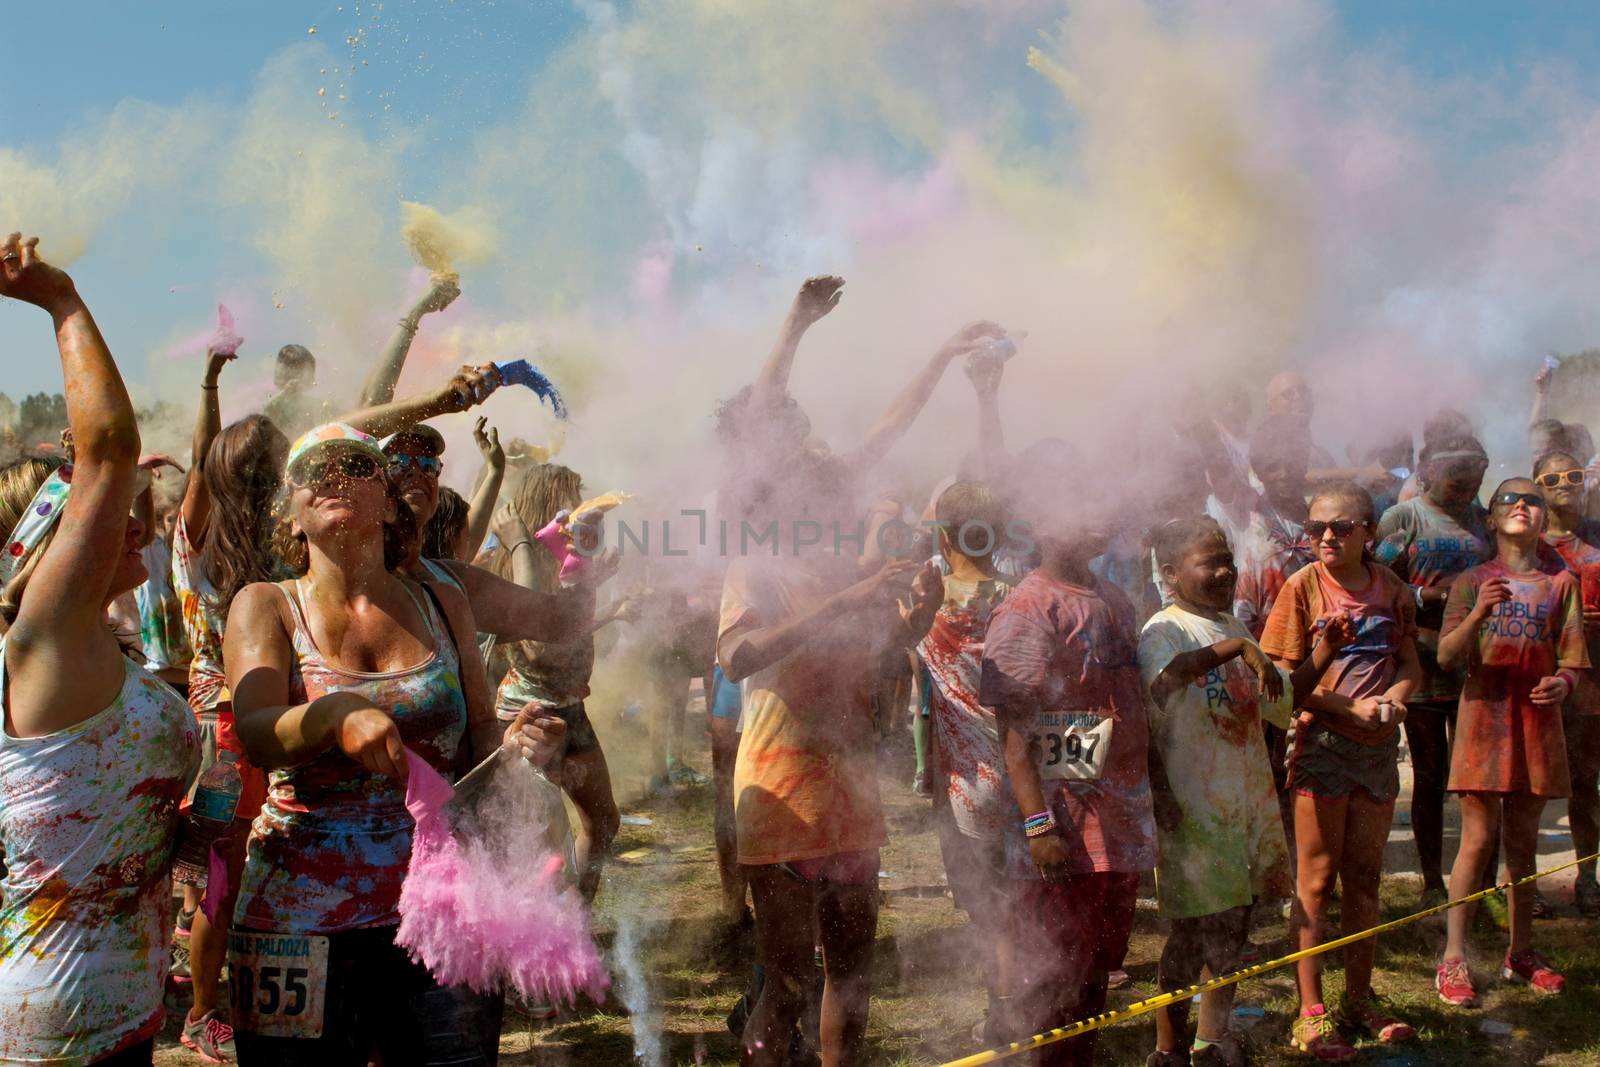 People Create Cloud Of Color At Bubble Palooza Event by BluIz60